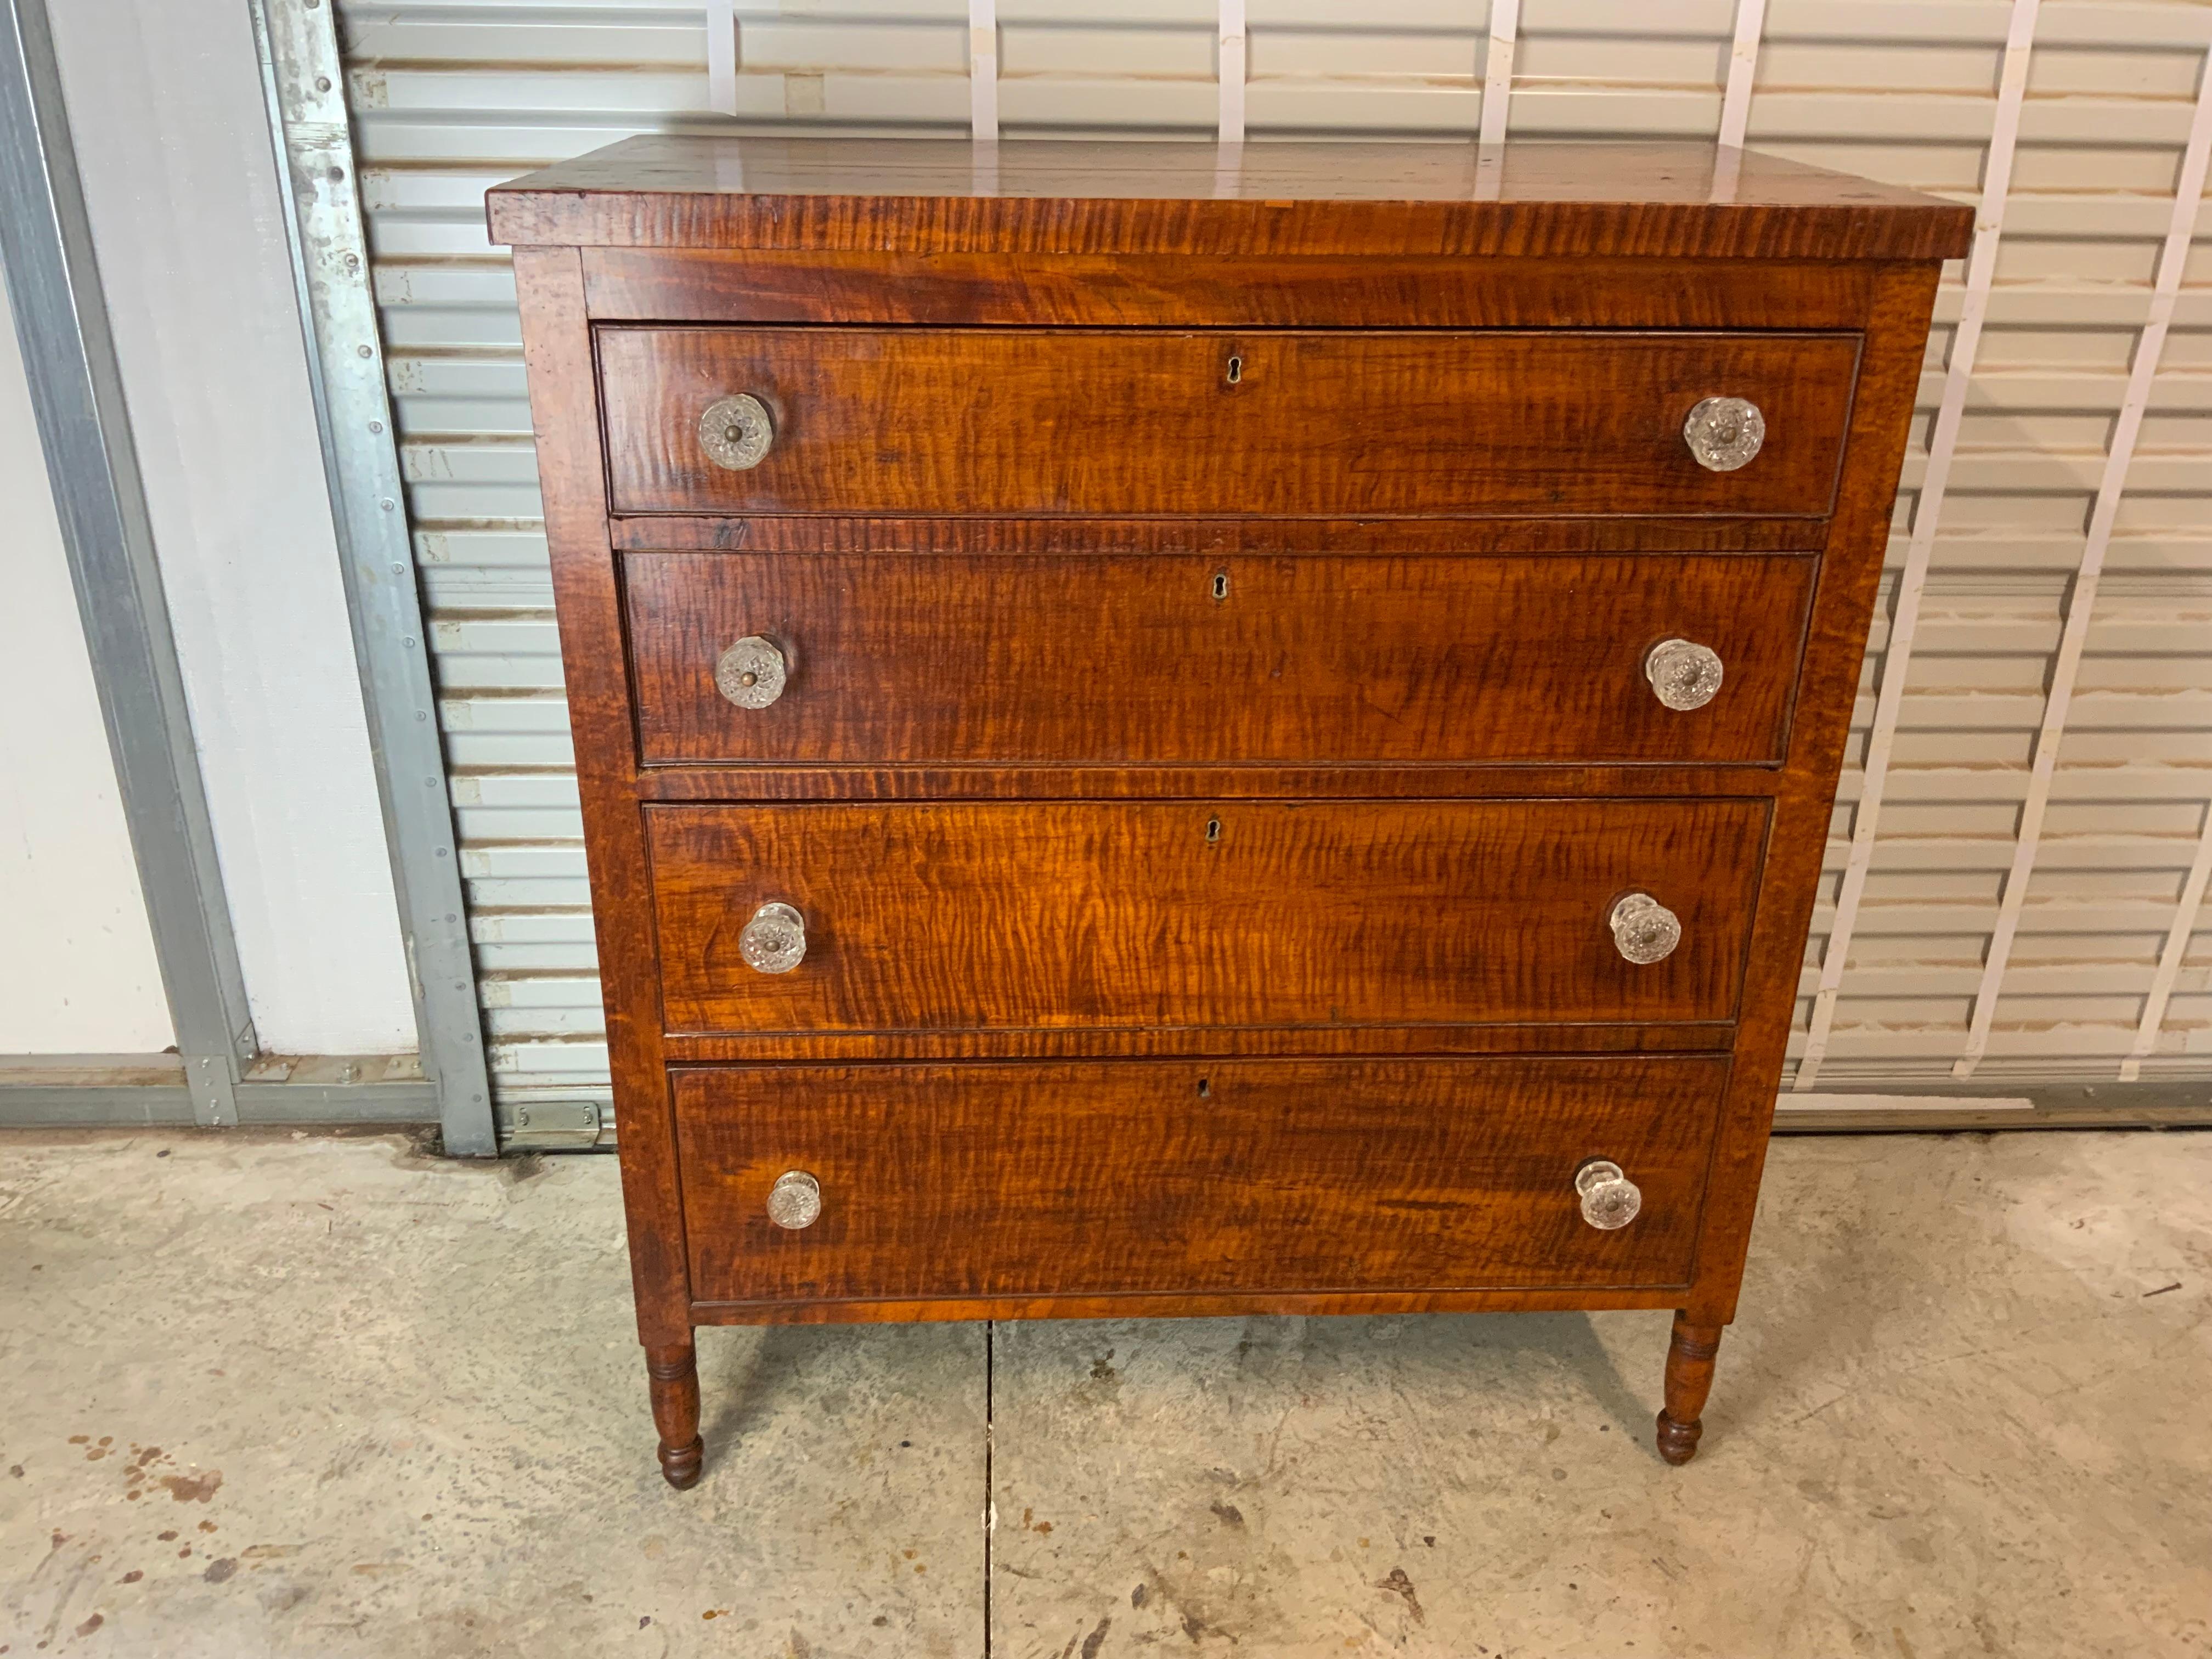 A nicely figured New England Curly Maple Sheraton chest 1815-20. White Pine secondary wood with period glass knobs on the four cock beaded graduated size drawers. Very old and possibly an original surface with a great color and patina. The drawers